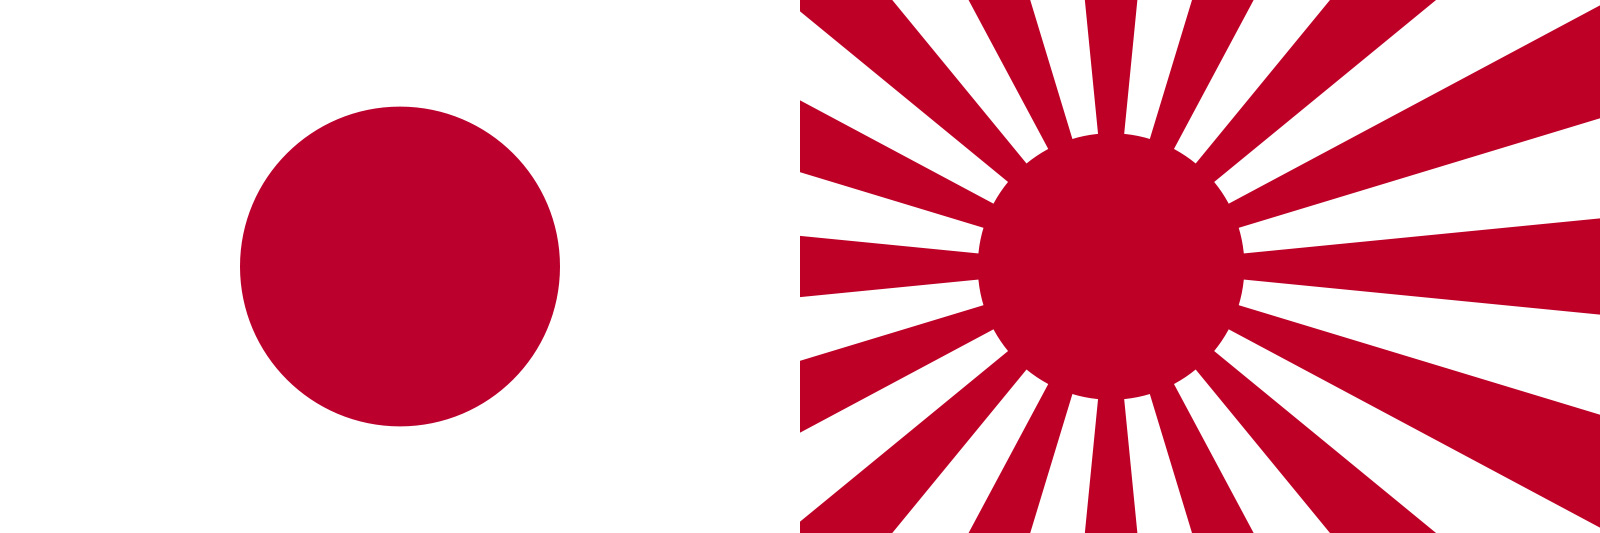 Hinomaru is established as the official flag to be flown from Japanese ships